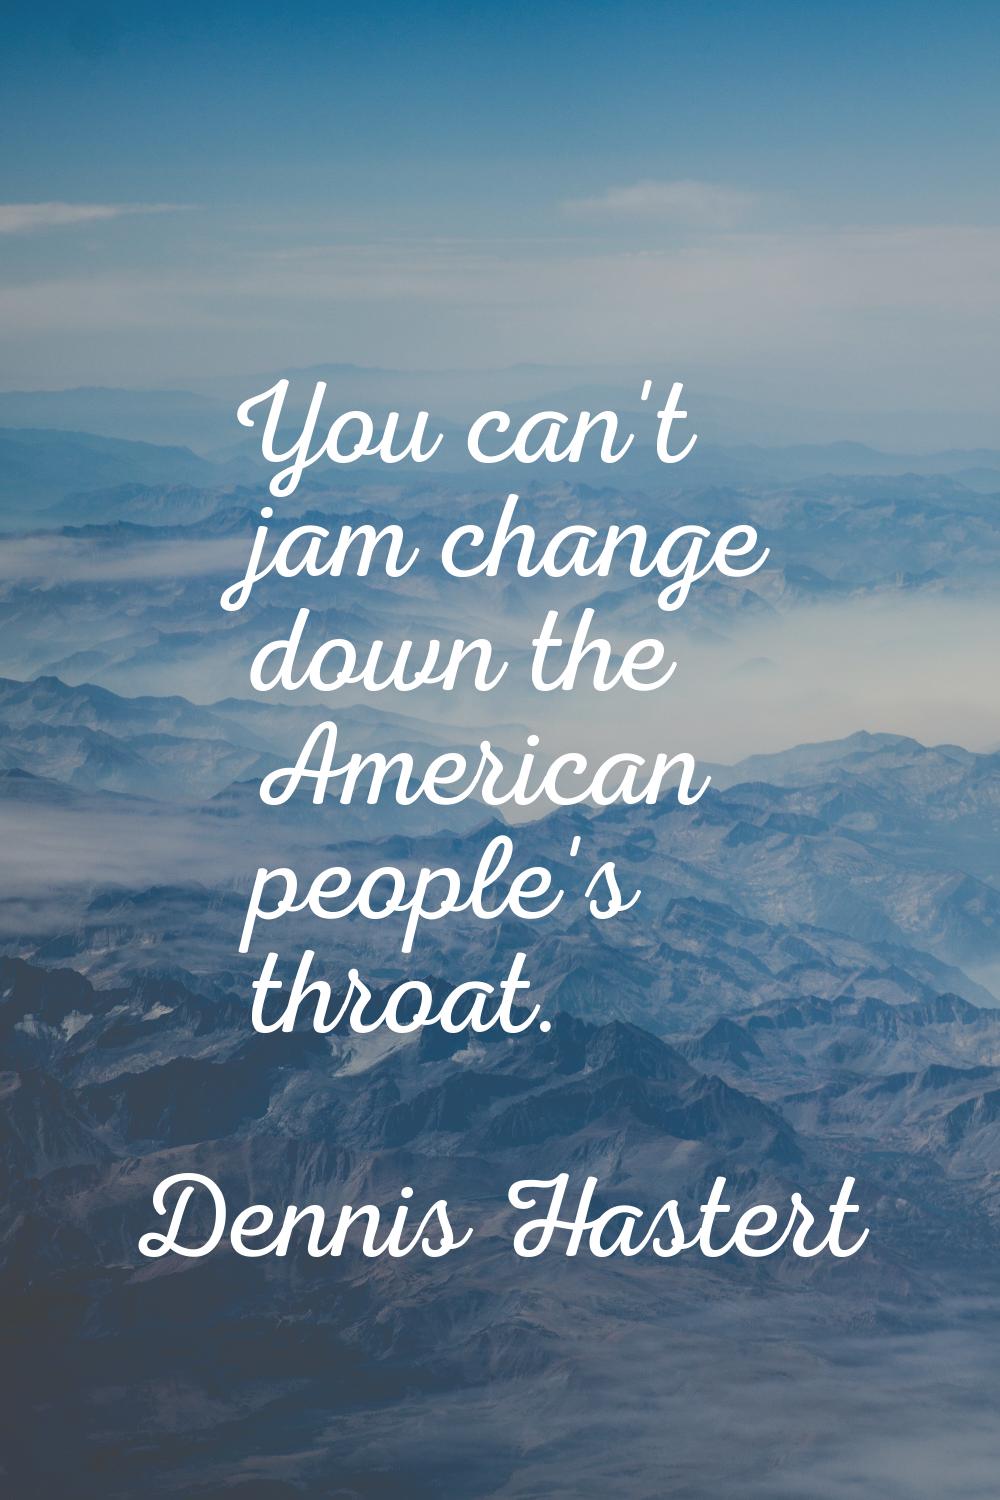 You can't jam change down the American people's throat.